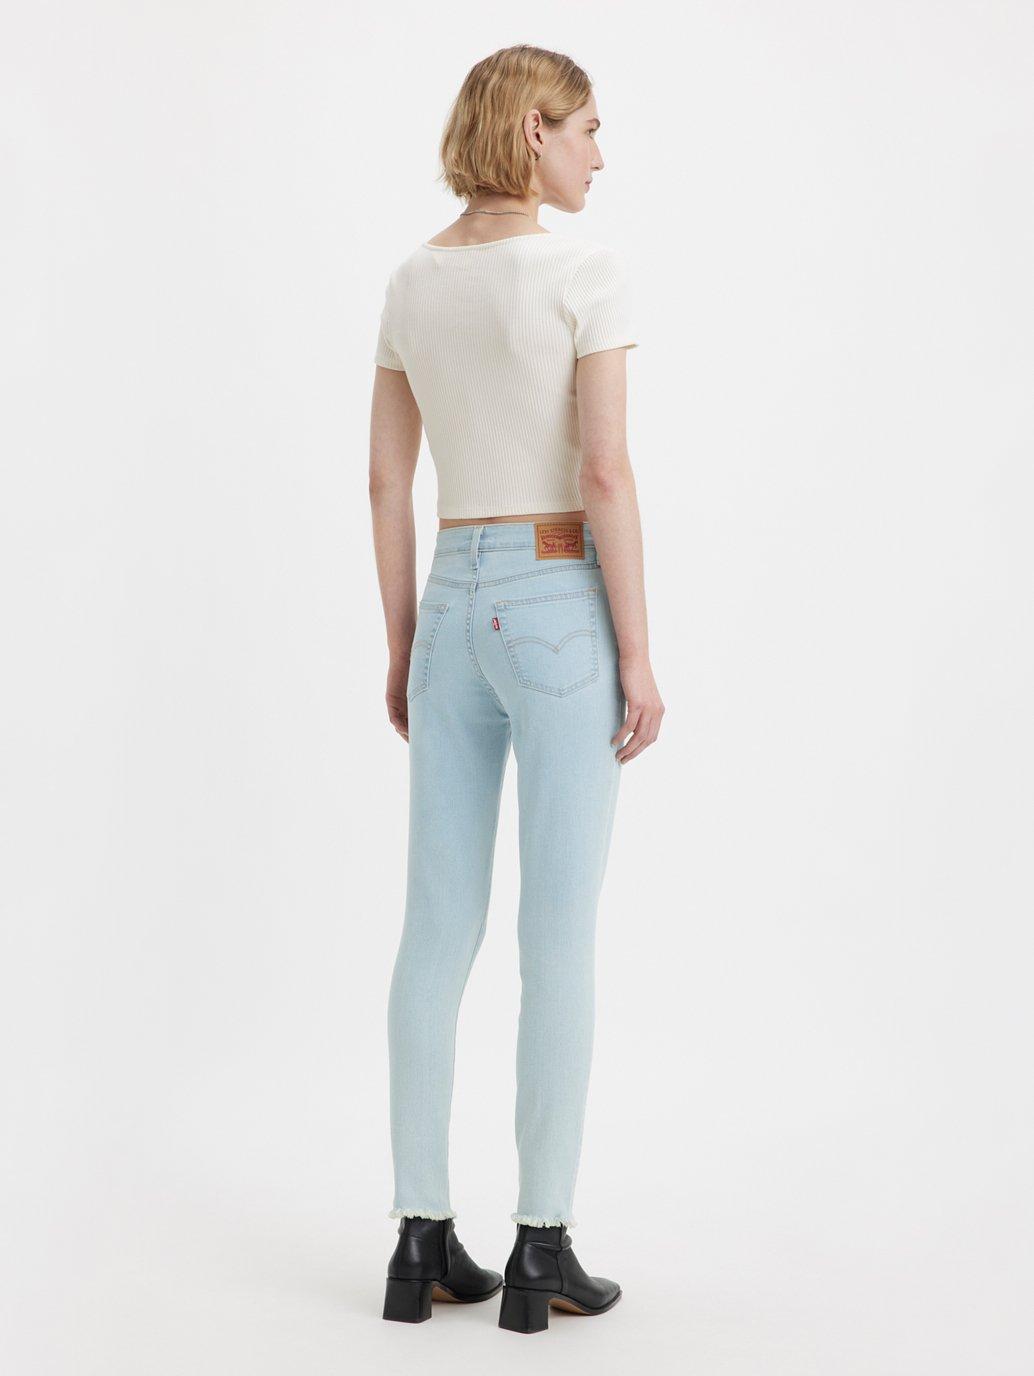 Buy Levi's® Women's 721 High-Rise Skinny Jeans| Levi's® Official Online ...